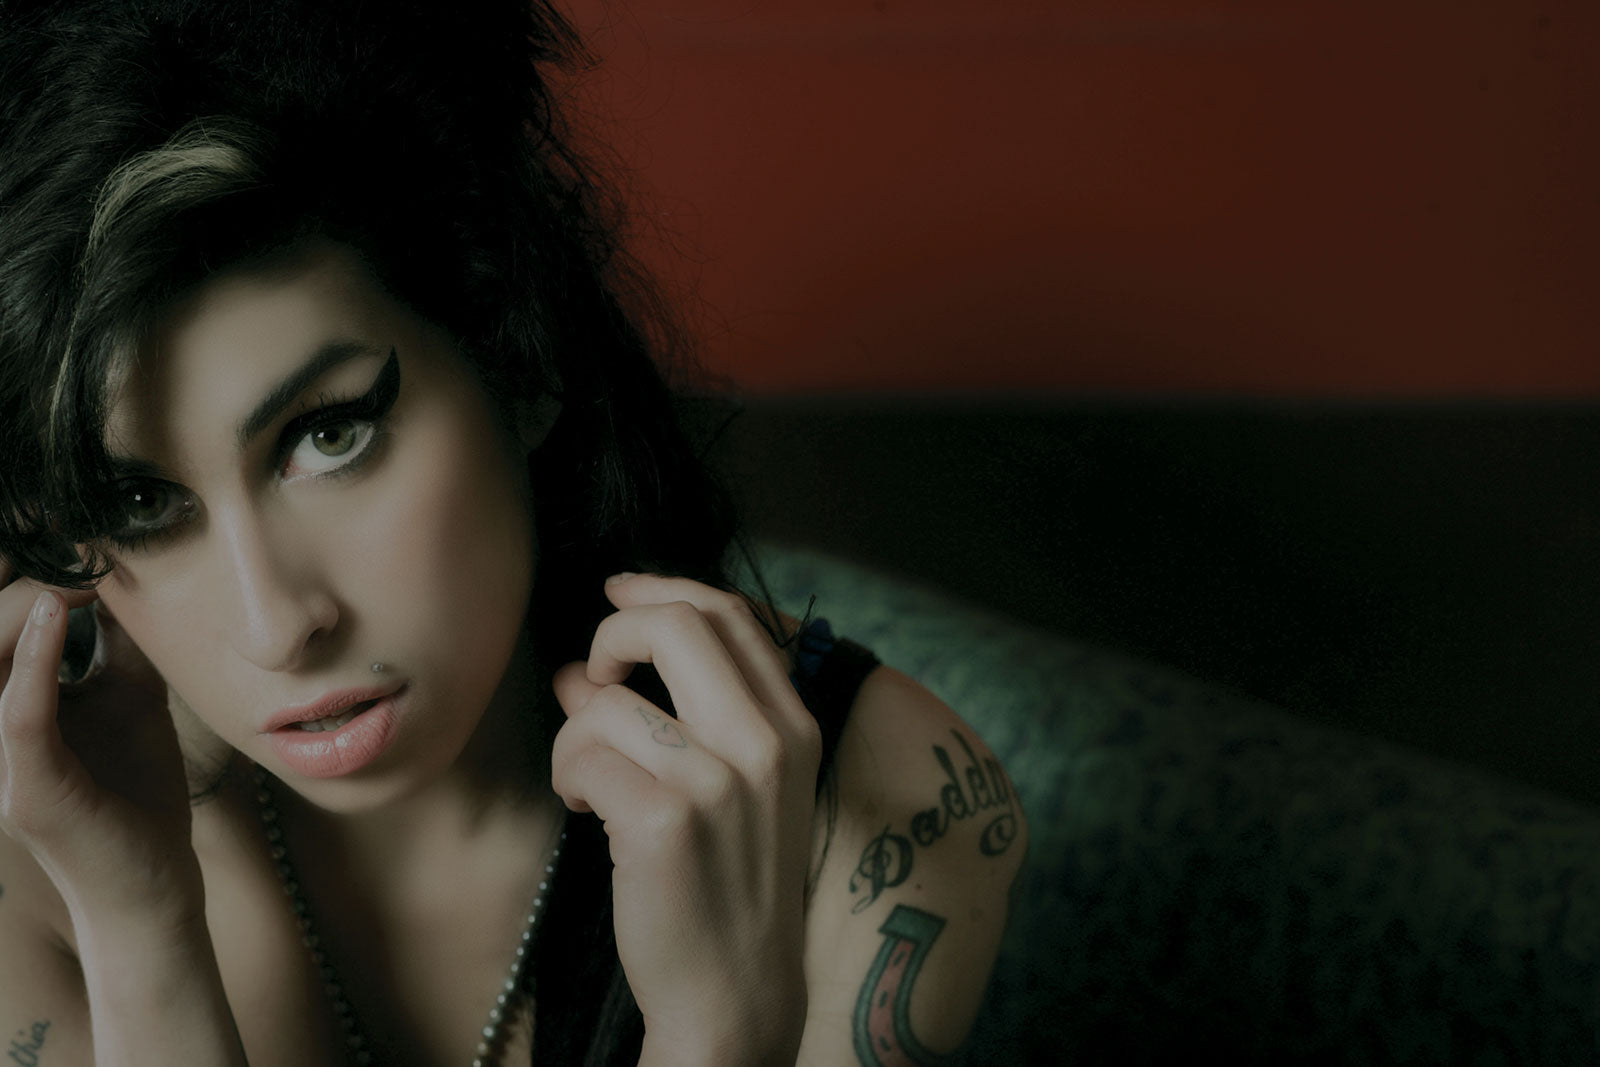 AMY WINEHOUSE'S DEBUT ALBUM FRANK CELEBRATES 20TH ANNIVERSARY WITH VINYL  PICTURE DISC - Umusic